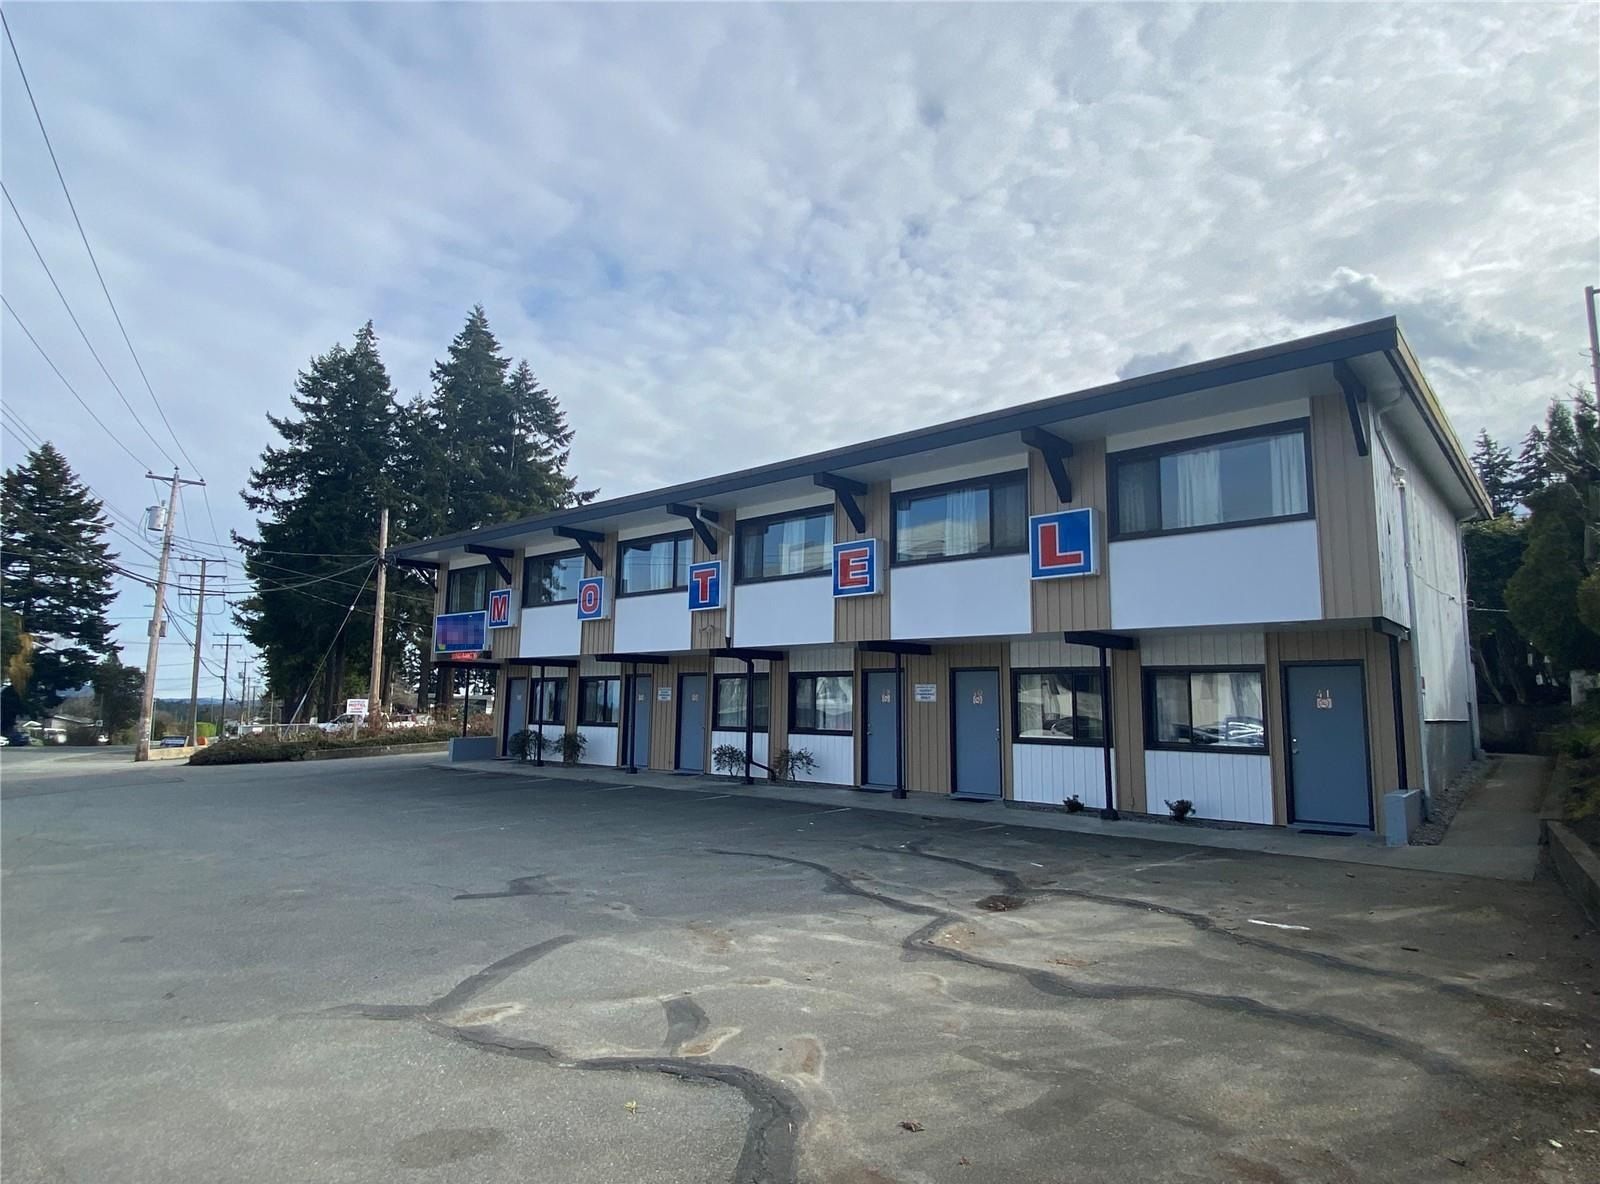 21 Rooms Motel for sale Vancouver Island BC